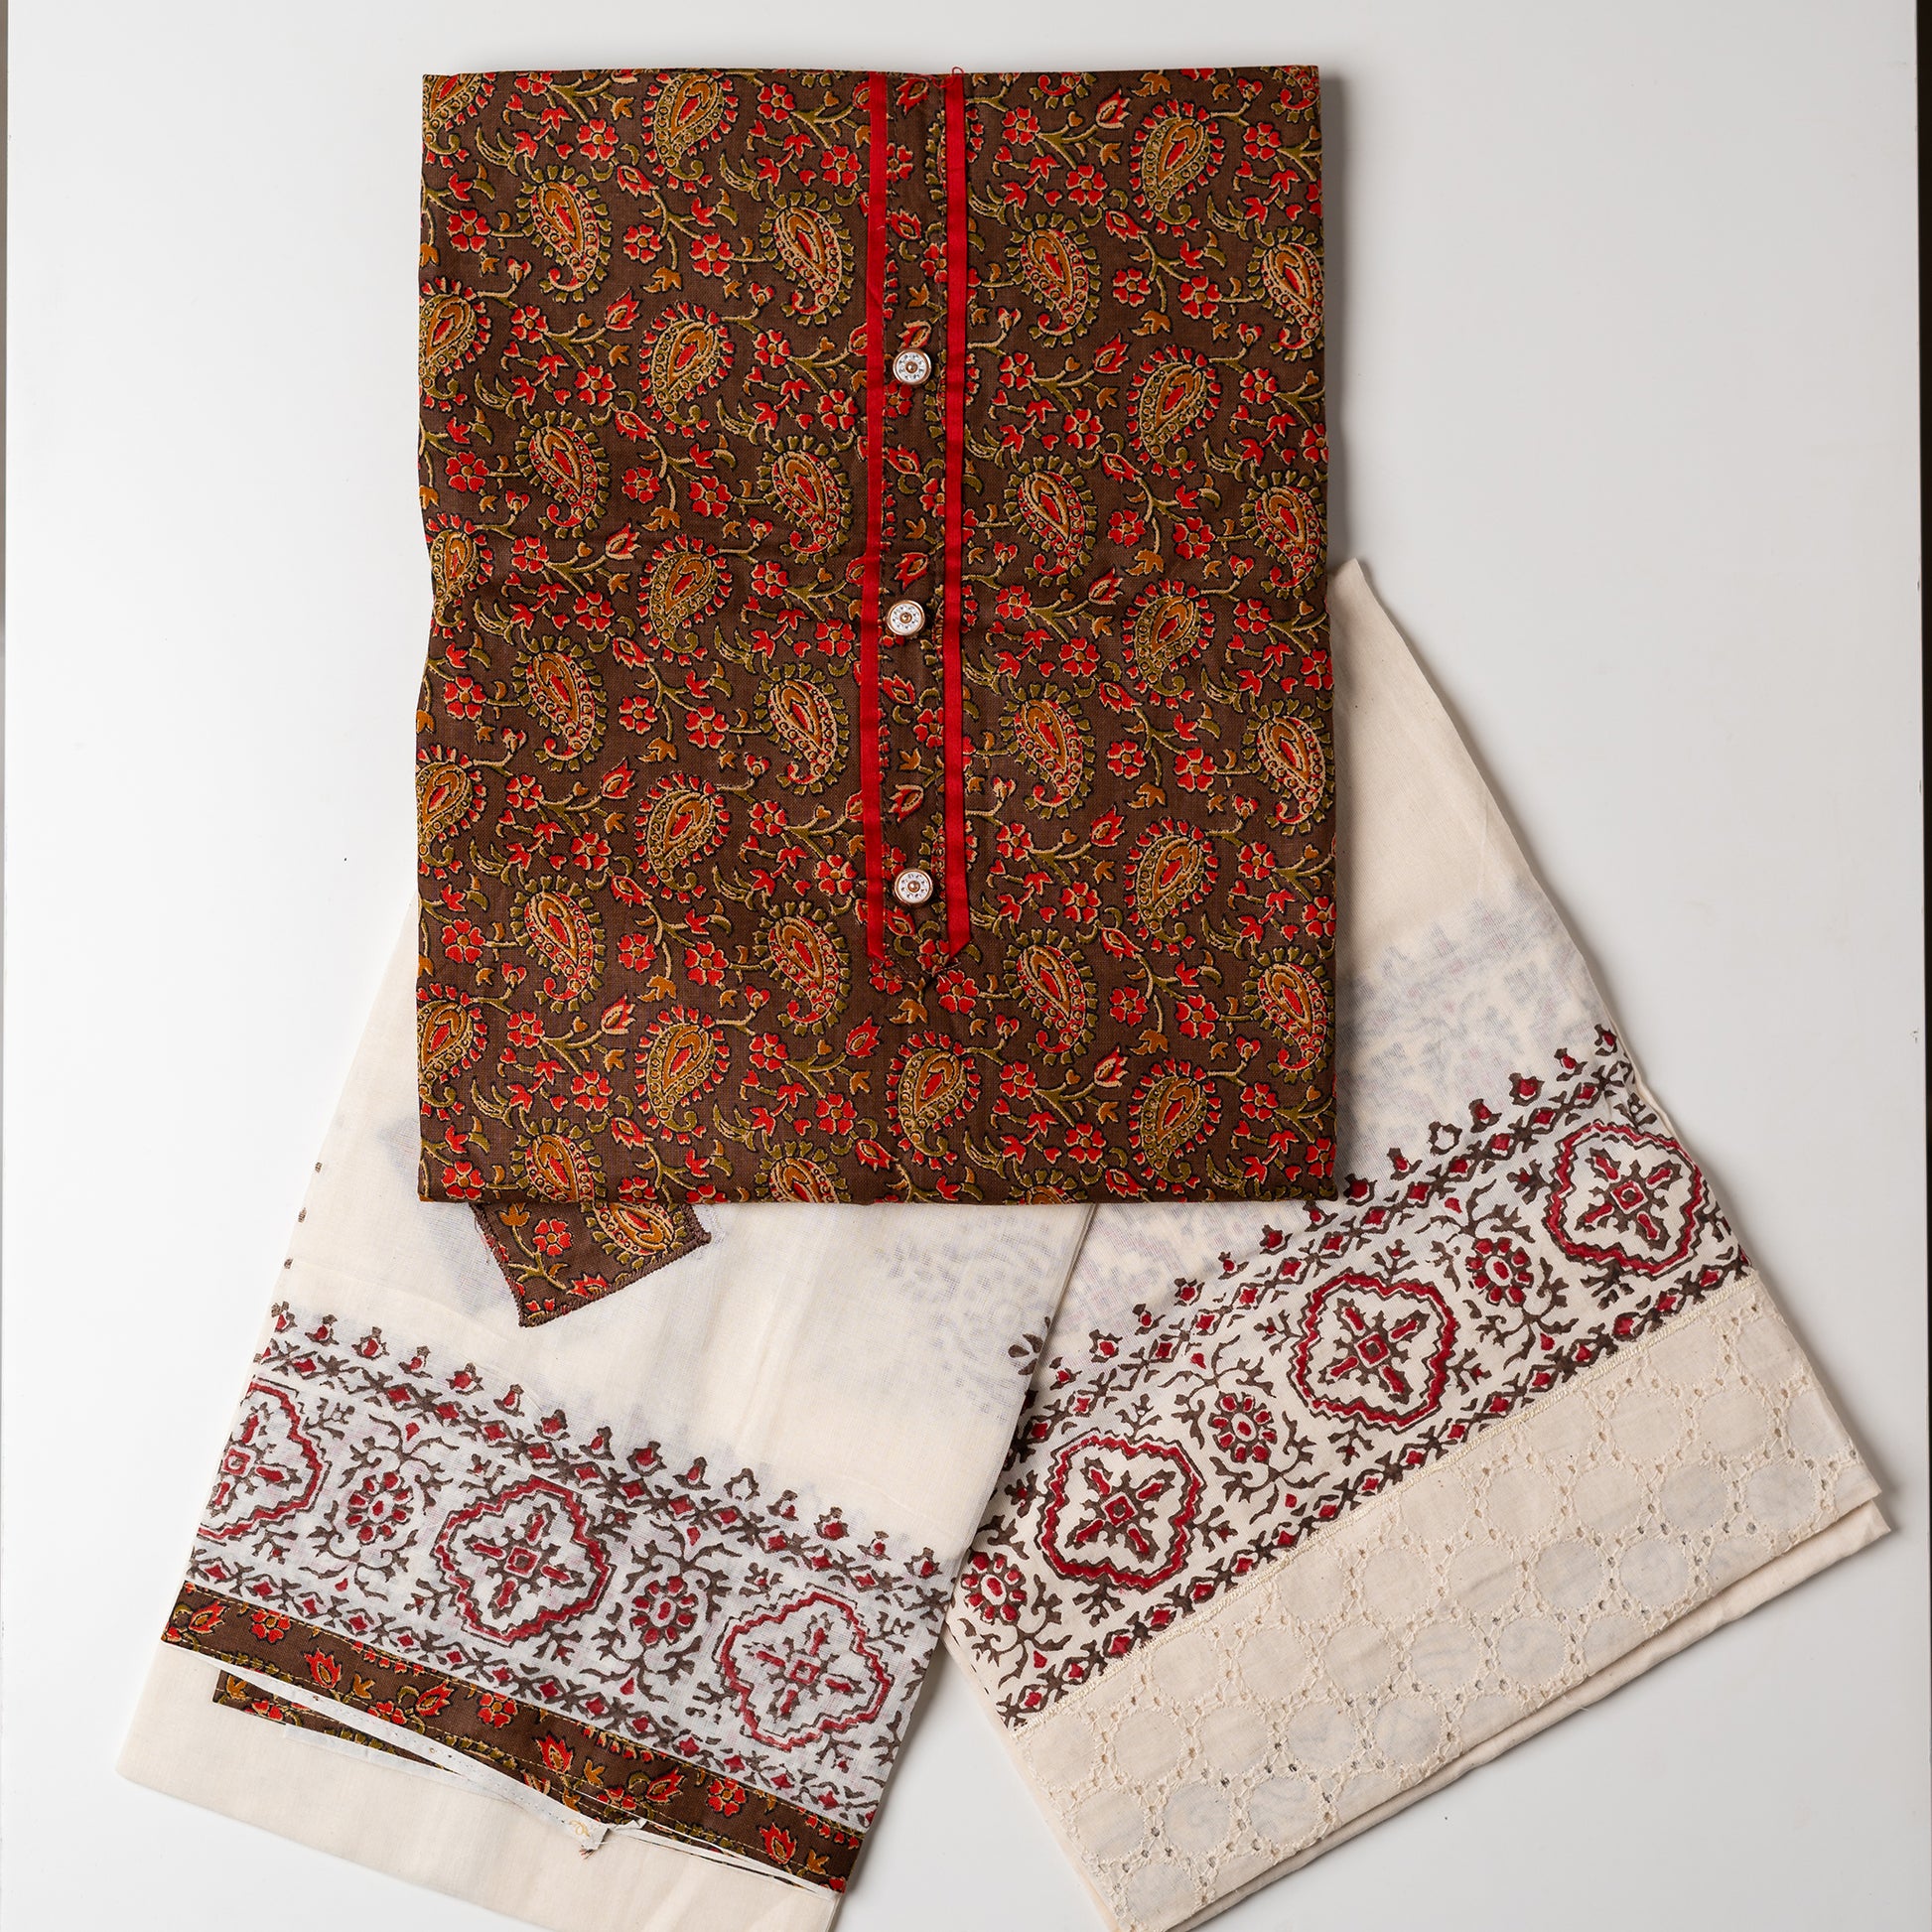 Salwar suit set, Cotton top with brown color base and multi color print design, buttons and contrast color piping in yoke, cream color cotton bottom with hakoba design at the edges and print. Cotton dupatta with matching color prints and cut works